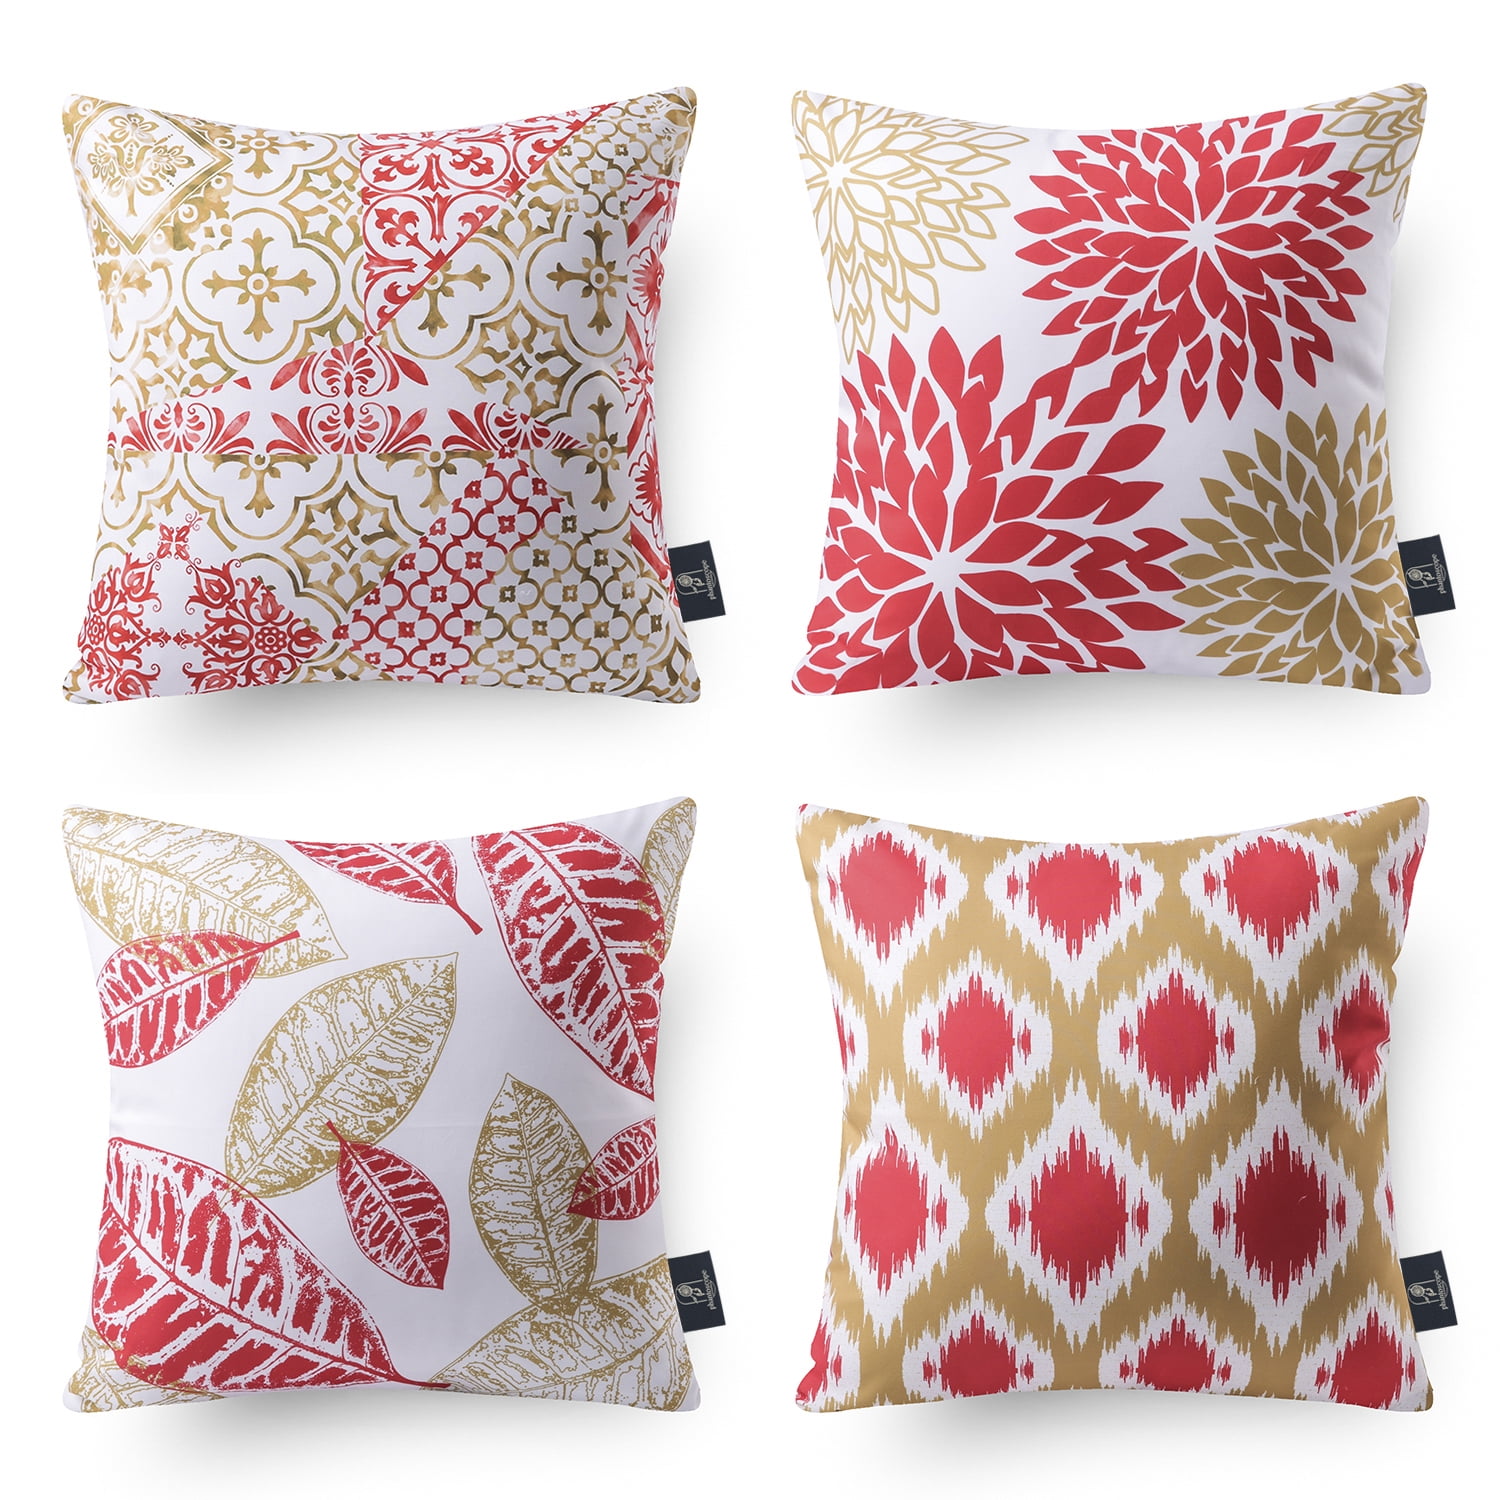 Phantoscope New Living Series Duplex Printing Decorative Throw Pillow  Covers, 18 x 18, Red and Yellow, Set of 4 